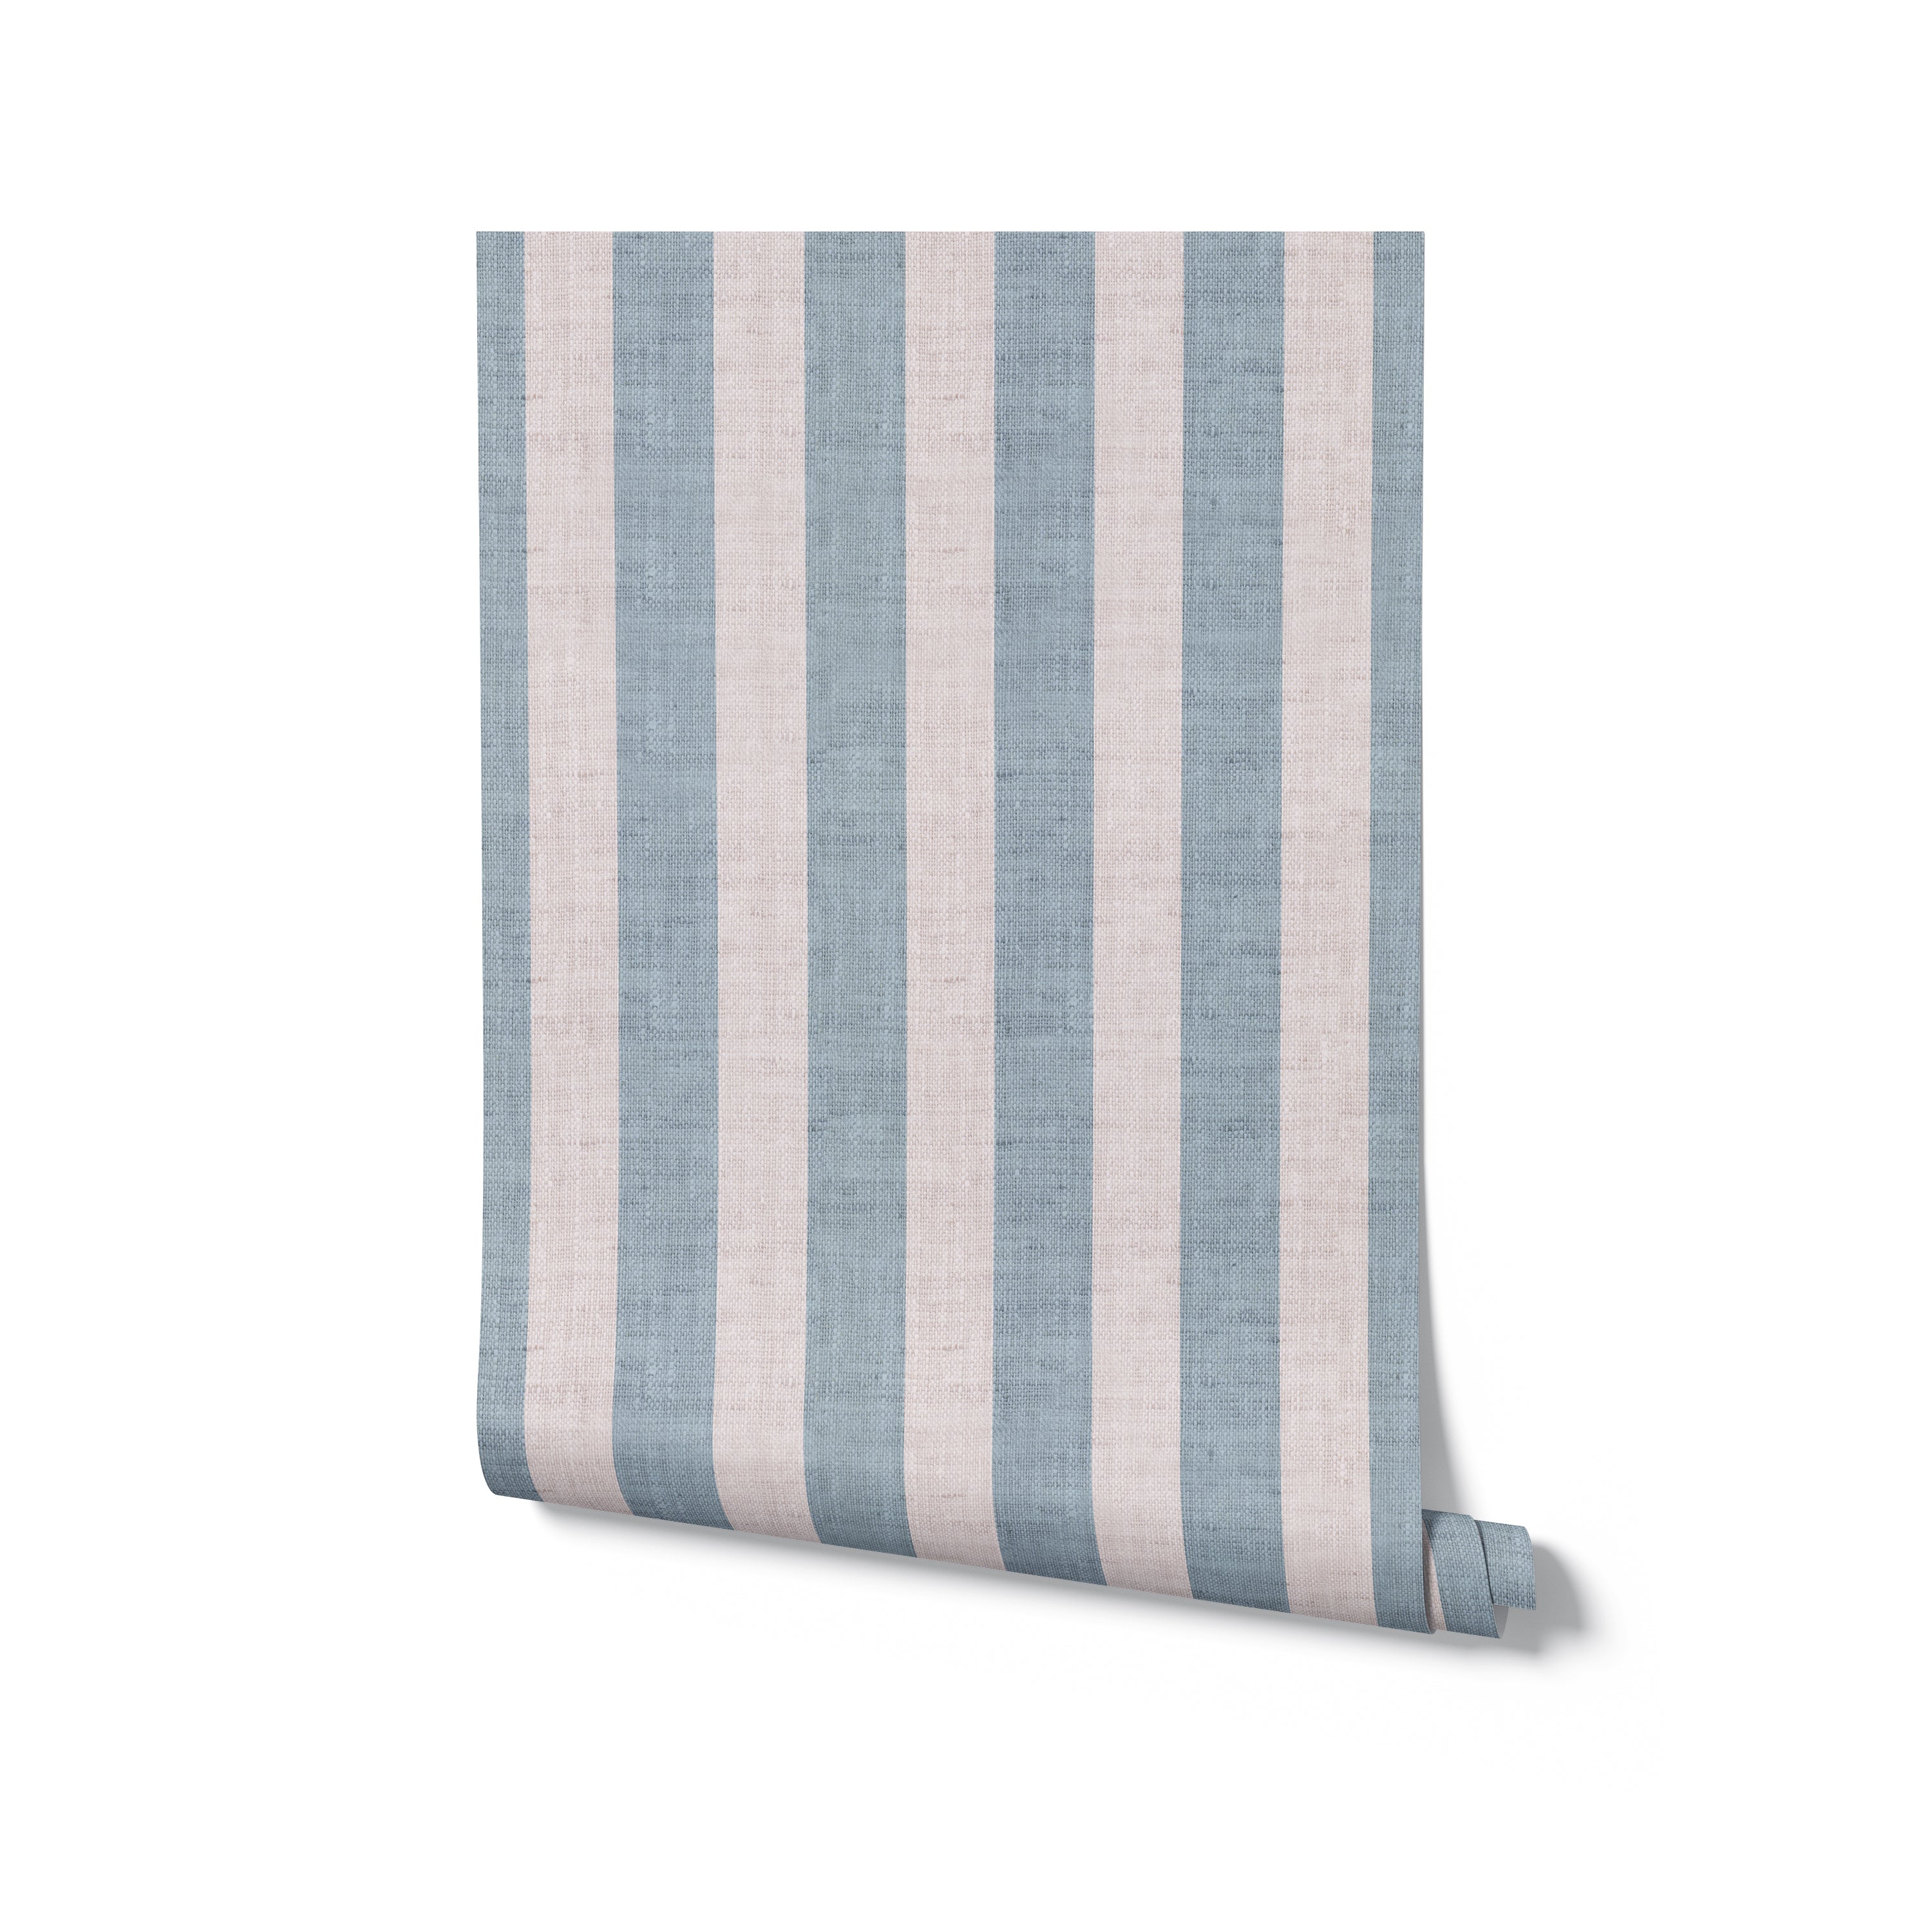 Rolled up view of Ticking Fabrics 7 II Wallpaper displaying wide vertical stripes in muted blue and cream. The visible texture mimics a fine linen material, ideal for adding a touch of understated elegance to any room